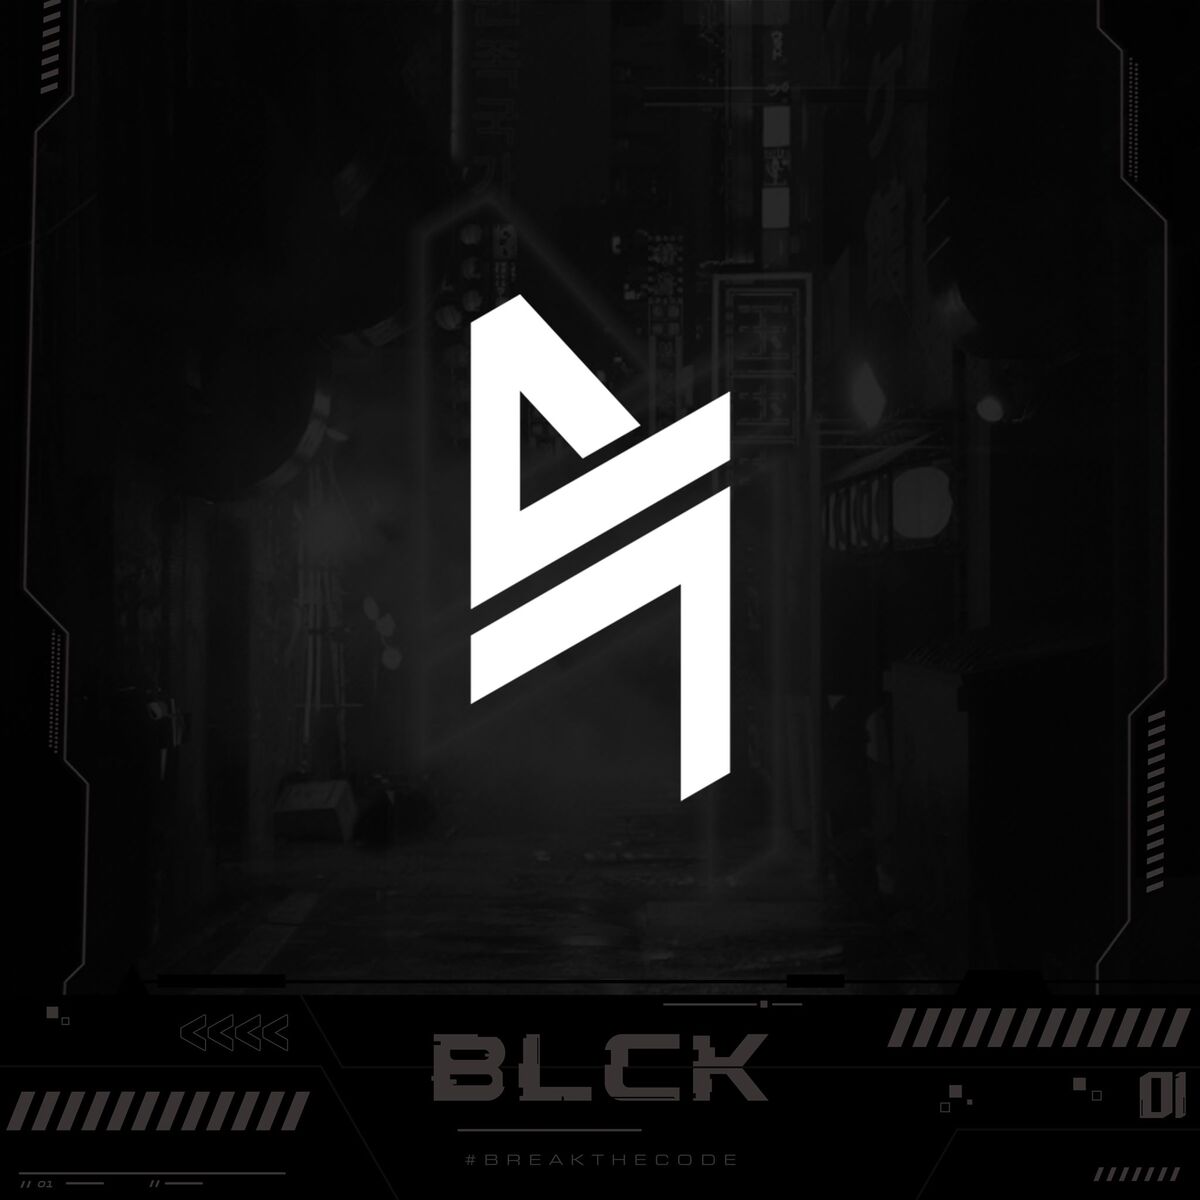 Blacklist International - Bounced back and got the W this time